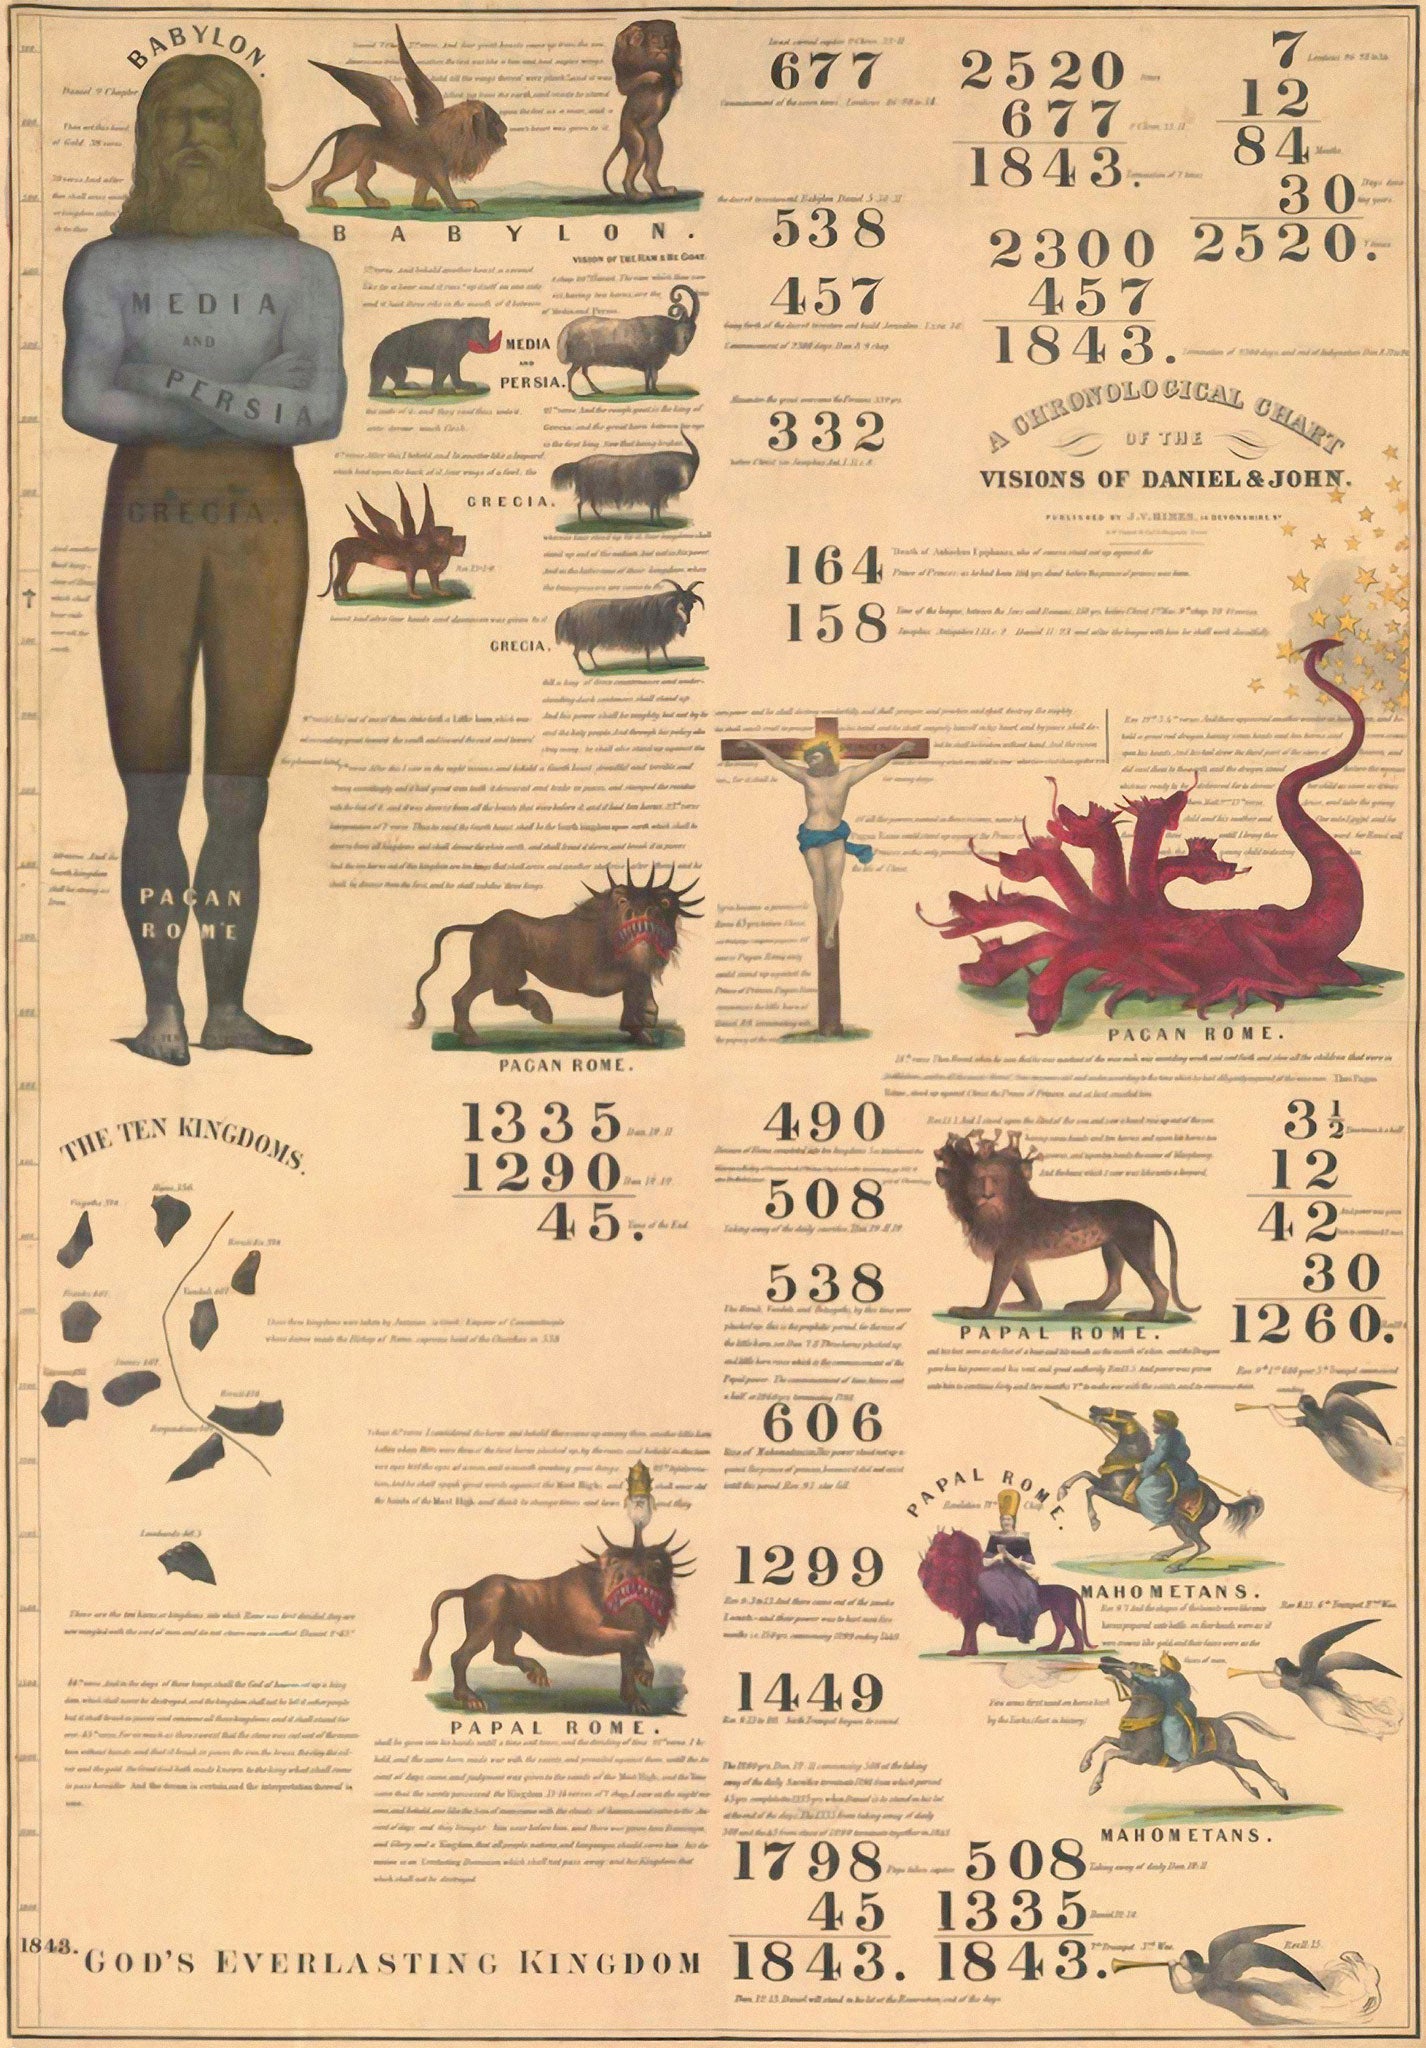 A chronological chart of the visions of Daniel and John published in 1842